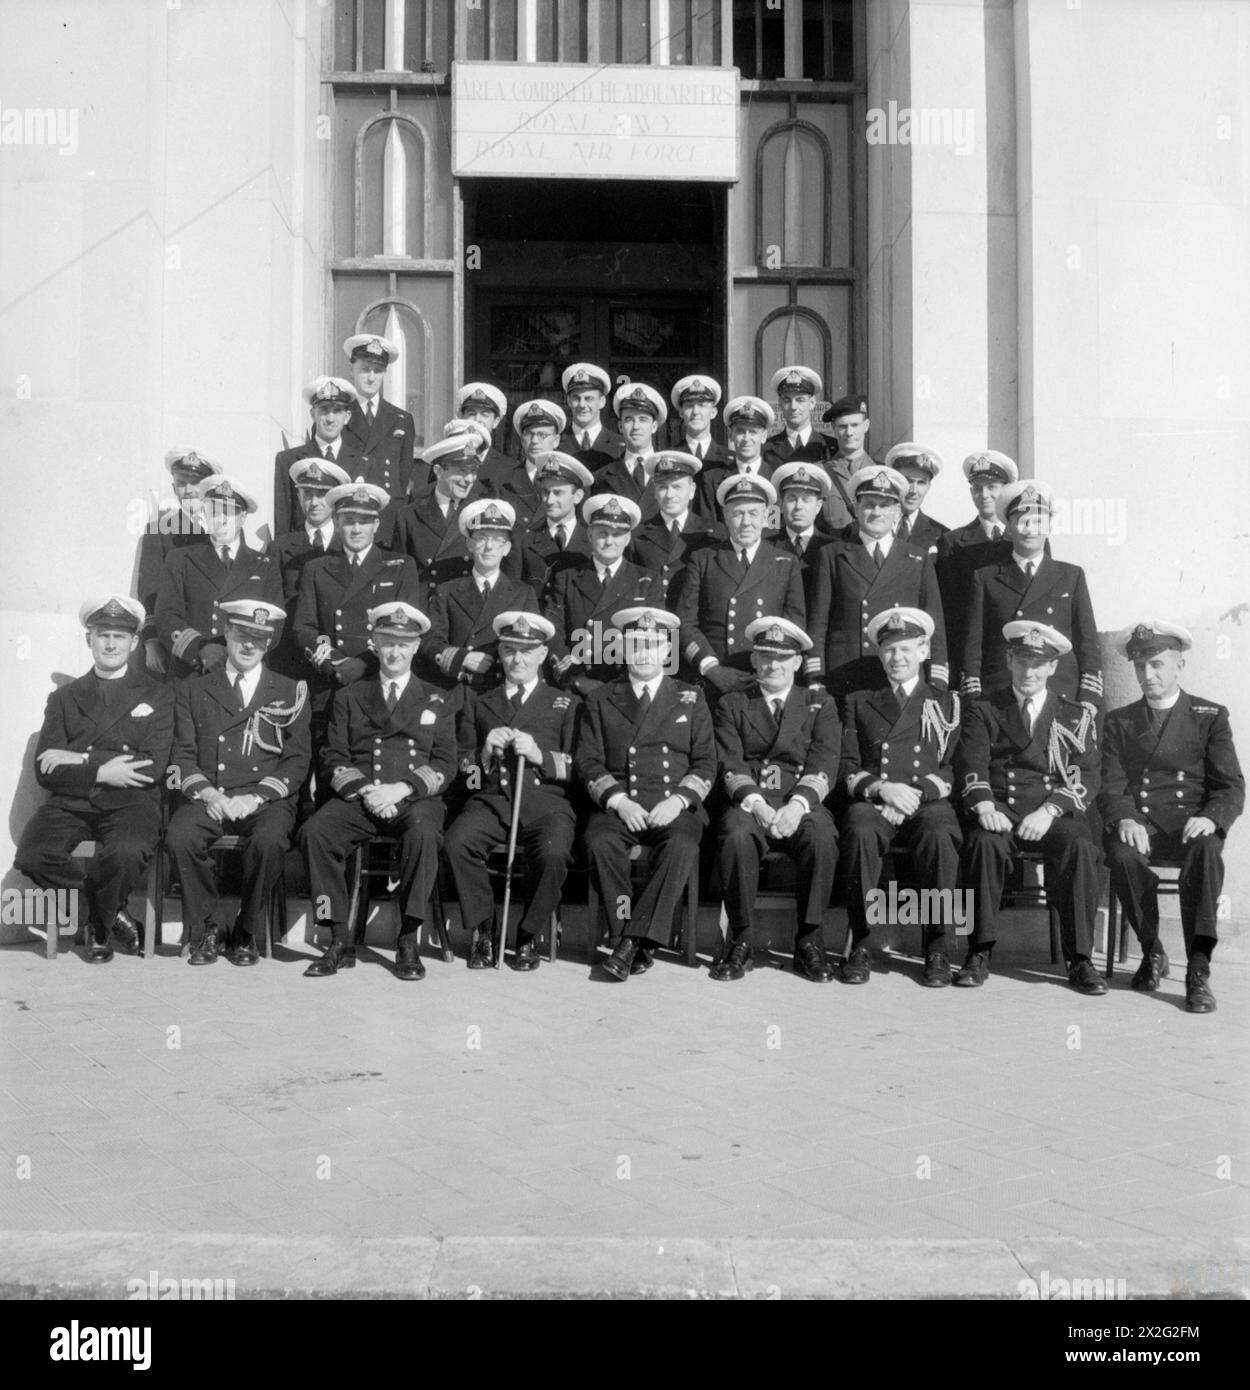 REAR ADMIRAL MORGAN AND HIS STAFF. DECEMBER 1944, TARANTO. REAR ADMIRAL C E MORGAN, DSO, FLAG OFFICER TARANTO AND ADRIATIC AND FOR LIAISON WITH THE ITALIANS, WITH HIS STAFF. - Left to right: First row: Chaplain W D Dinnis; Lieut Cdr L White, USN; Captain C H Duffett, DSO, RN; Commodore J Powell, DSO; Rear Admiral C E Morgan, DSO; Captain R I Money, RN; Lieut Cdr (S) G H L Kitson, RN; Lieut J W Kentish, RNVR; Chaplain W Devine, MC. Second row: Commander A Morrison, RN; Commander A G Orr-Ewing, RNVR; Commander R F Nagle, RNVR; Commander T H Trueman, RNVR; Commander R B Bodily, RN; Commander (E) Stock Photo